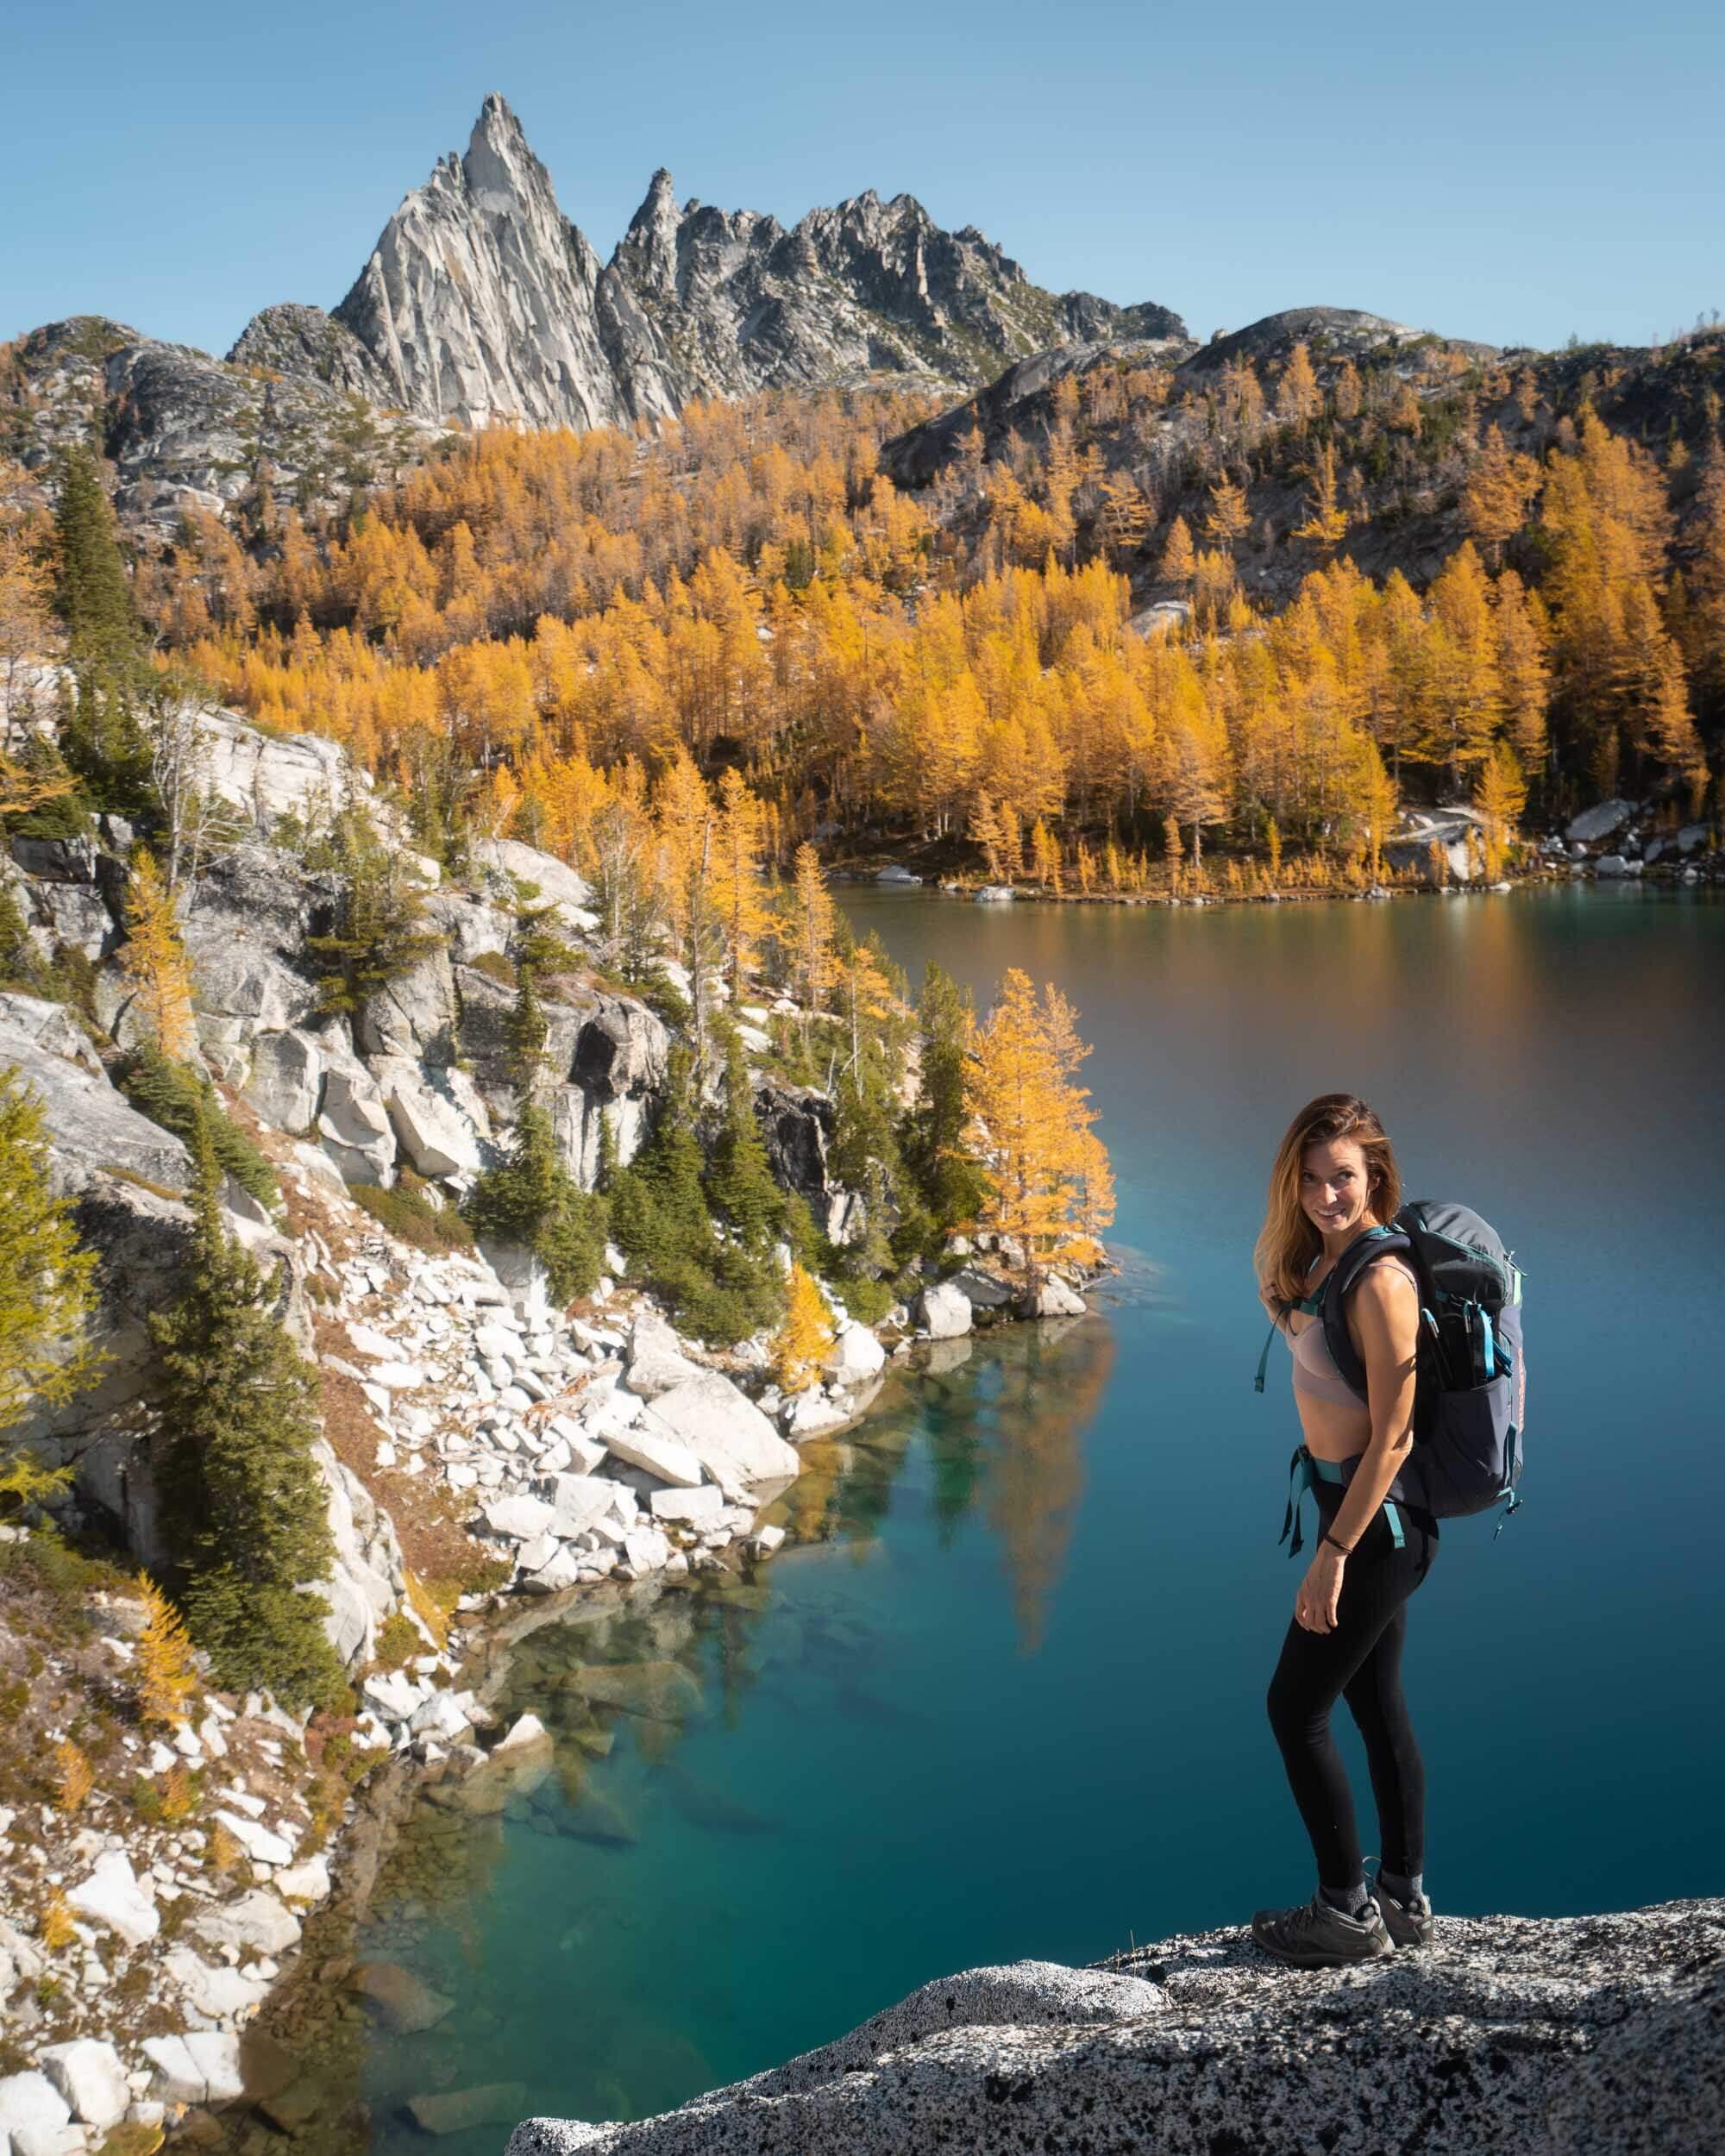 There are endless blue alpine lakes to stop and admire in The Enchantments. Wearing  Icebreaker  base layers, Keen Terridora Hiking Boots, and Patagonia’s 9 Trails Backpack.